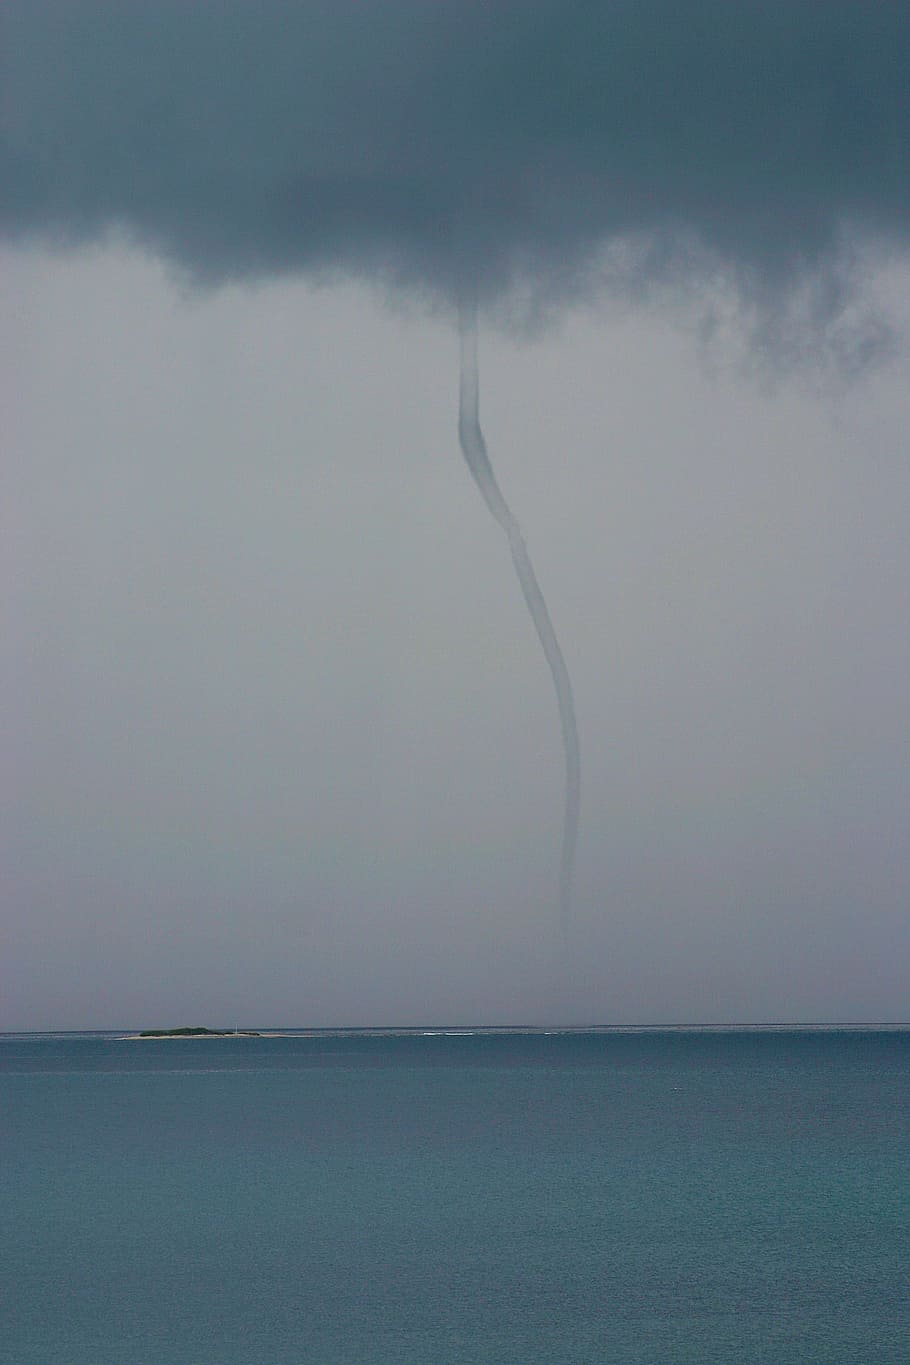 Water Spout, Weather, Tornado, spout, rare weather, nature, ocean weather, peurto rico island, sea, water